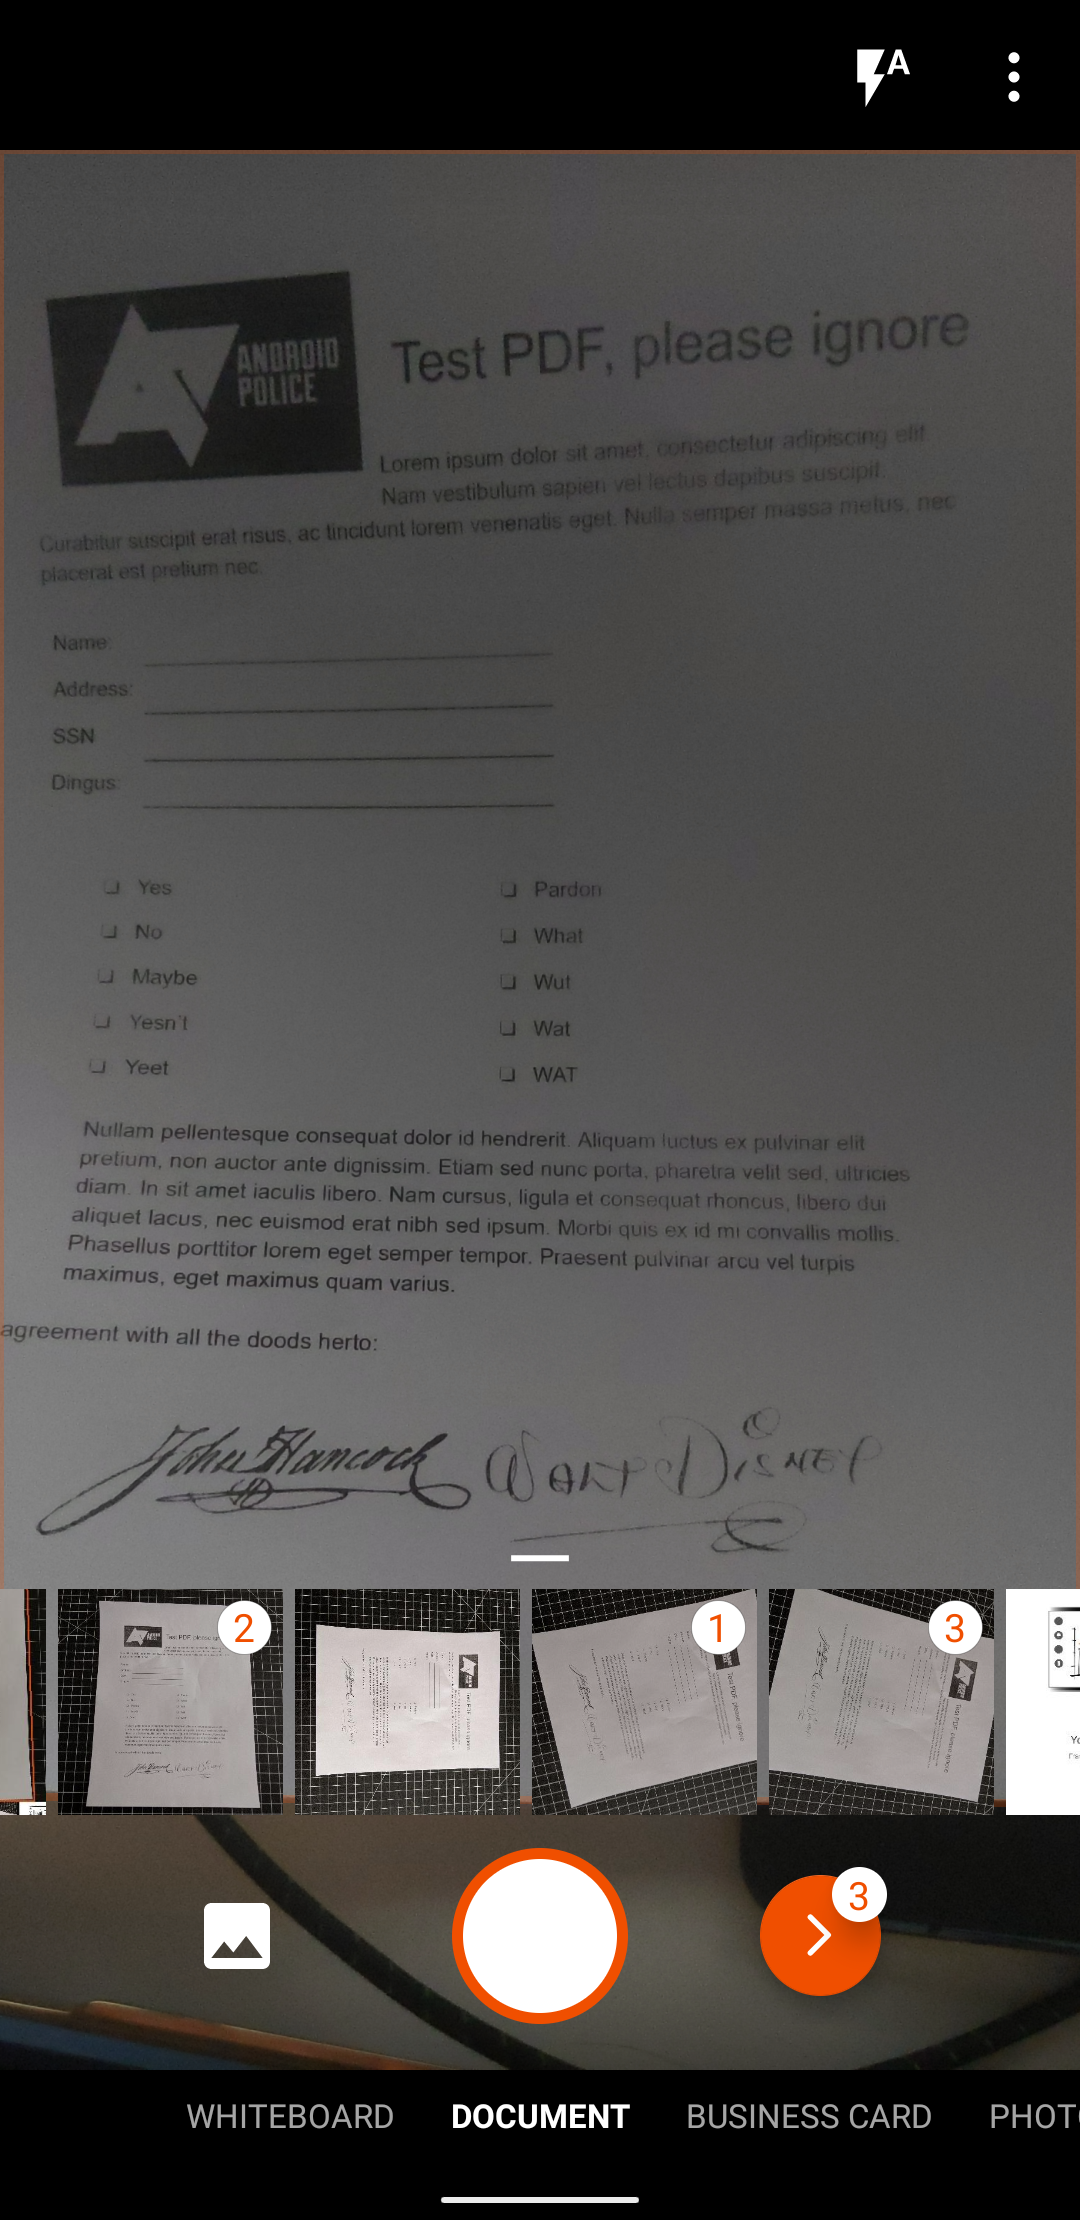 scanning app showing document resting on black table